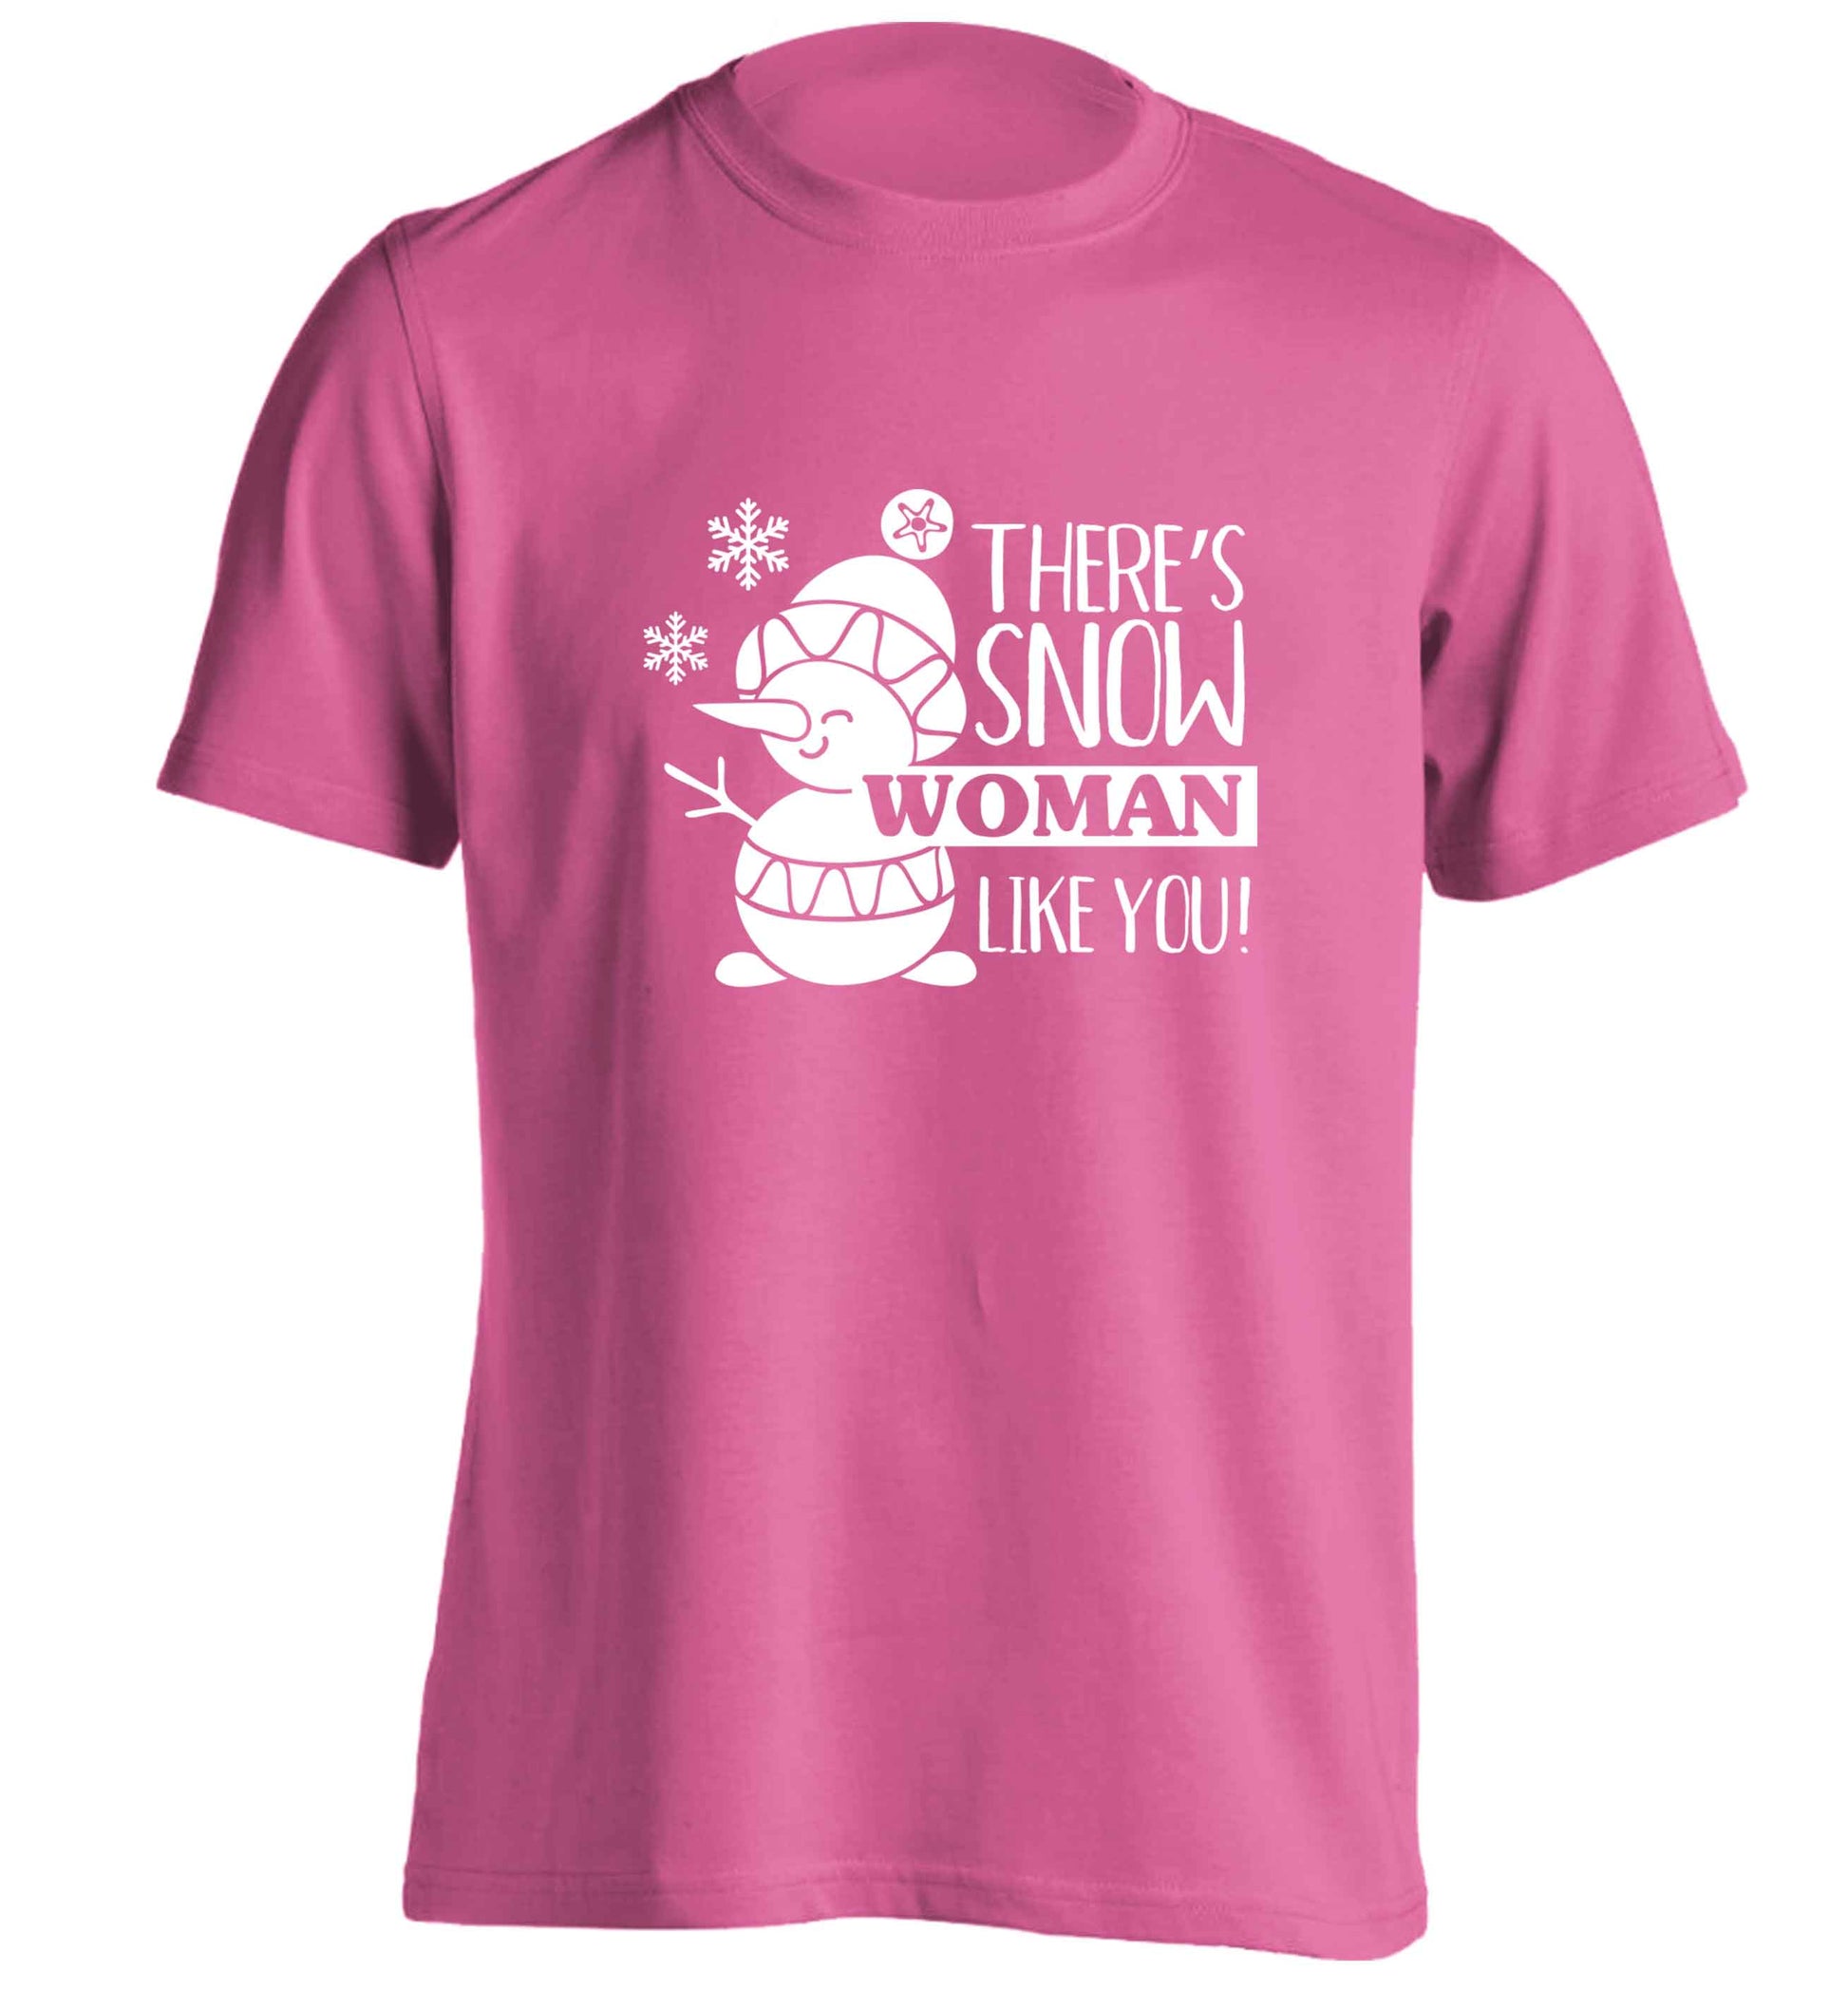 There's snow woman like you adults unisex pink Tshirt 2XL